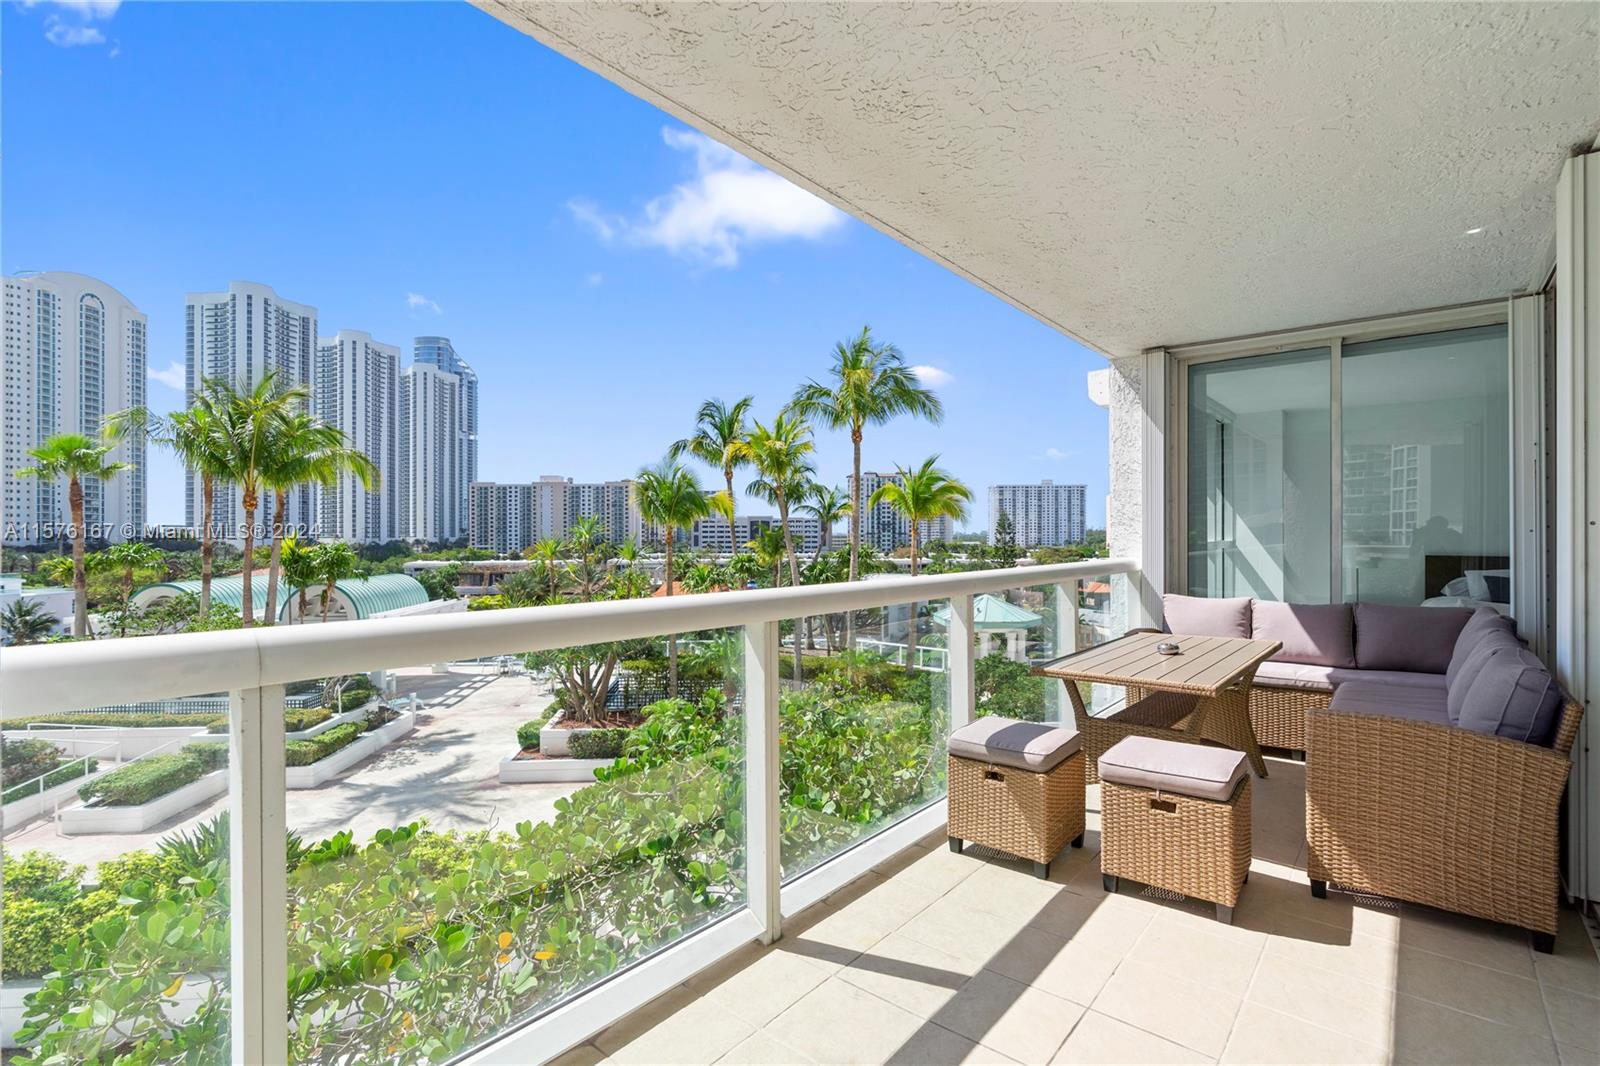 Great layout, spacious and fully renovated unit with 2 bedrooms, 2 bathrooms plus Den and oversized balcony. Wonderful views to the pool, beach, Oleta Park and Intracoastal. Large living room, marble floors throughout all the unit, stainless steel appliances, brand new kitchen and bathrooms.
residents of Oceania V enjoy Resort-Like amenities including private beach club with beach services, Health Club & Spa, 2 oceanfront dining choices, yoga and fitness classes, tennis courts, marina, hair salon, squash court, valet parking, 24 hs security and more. Oceania V is in the heart of Sunny Isles beach, steps away from elegant restaurants, shoppings, sand beaches and an A1 school district.